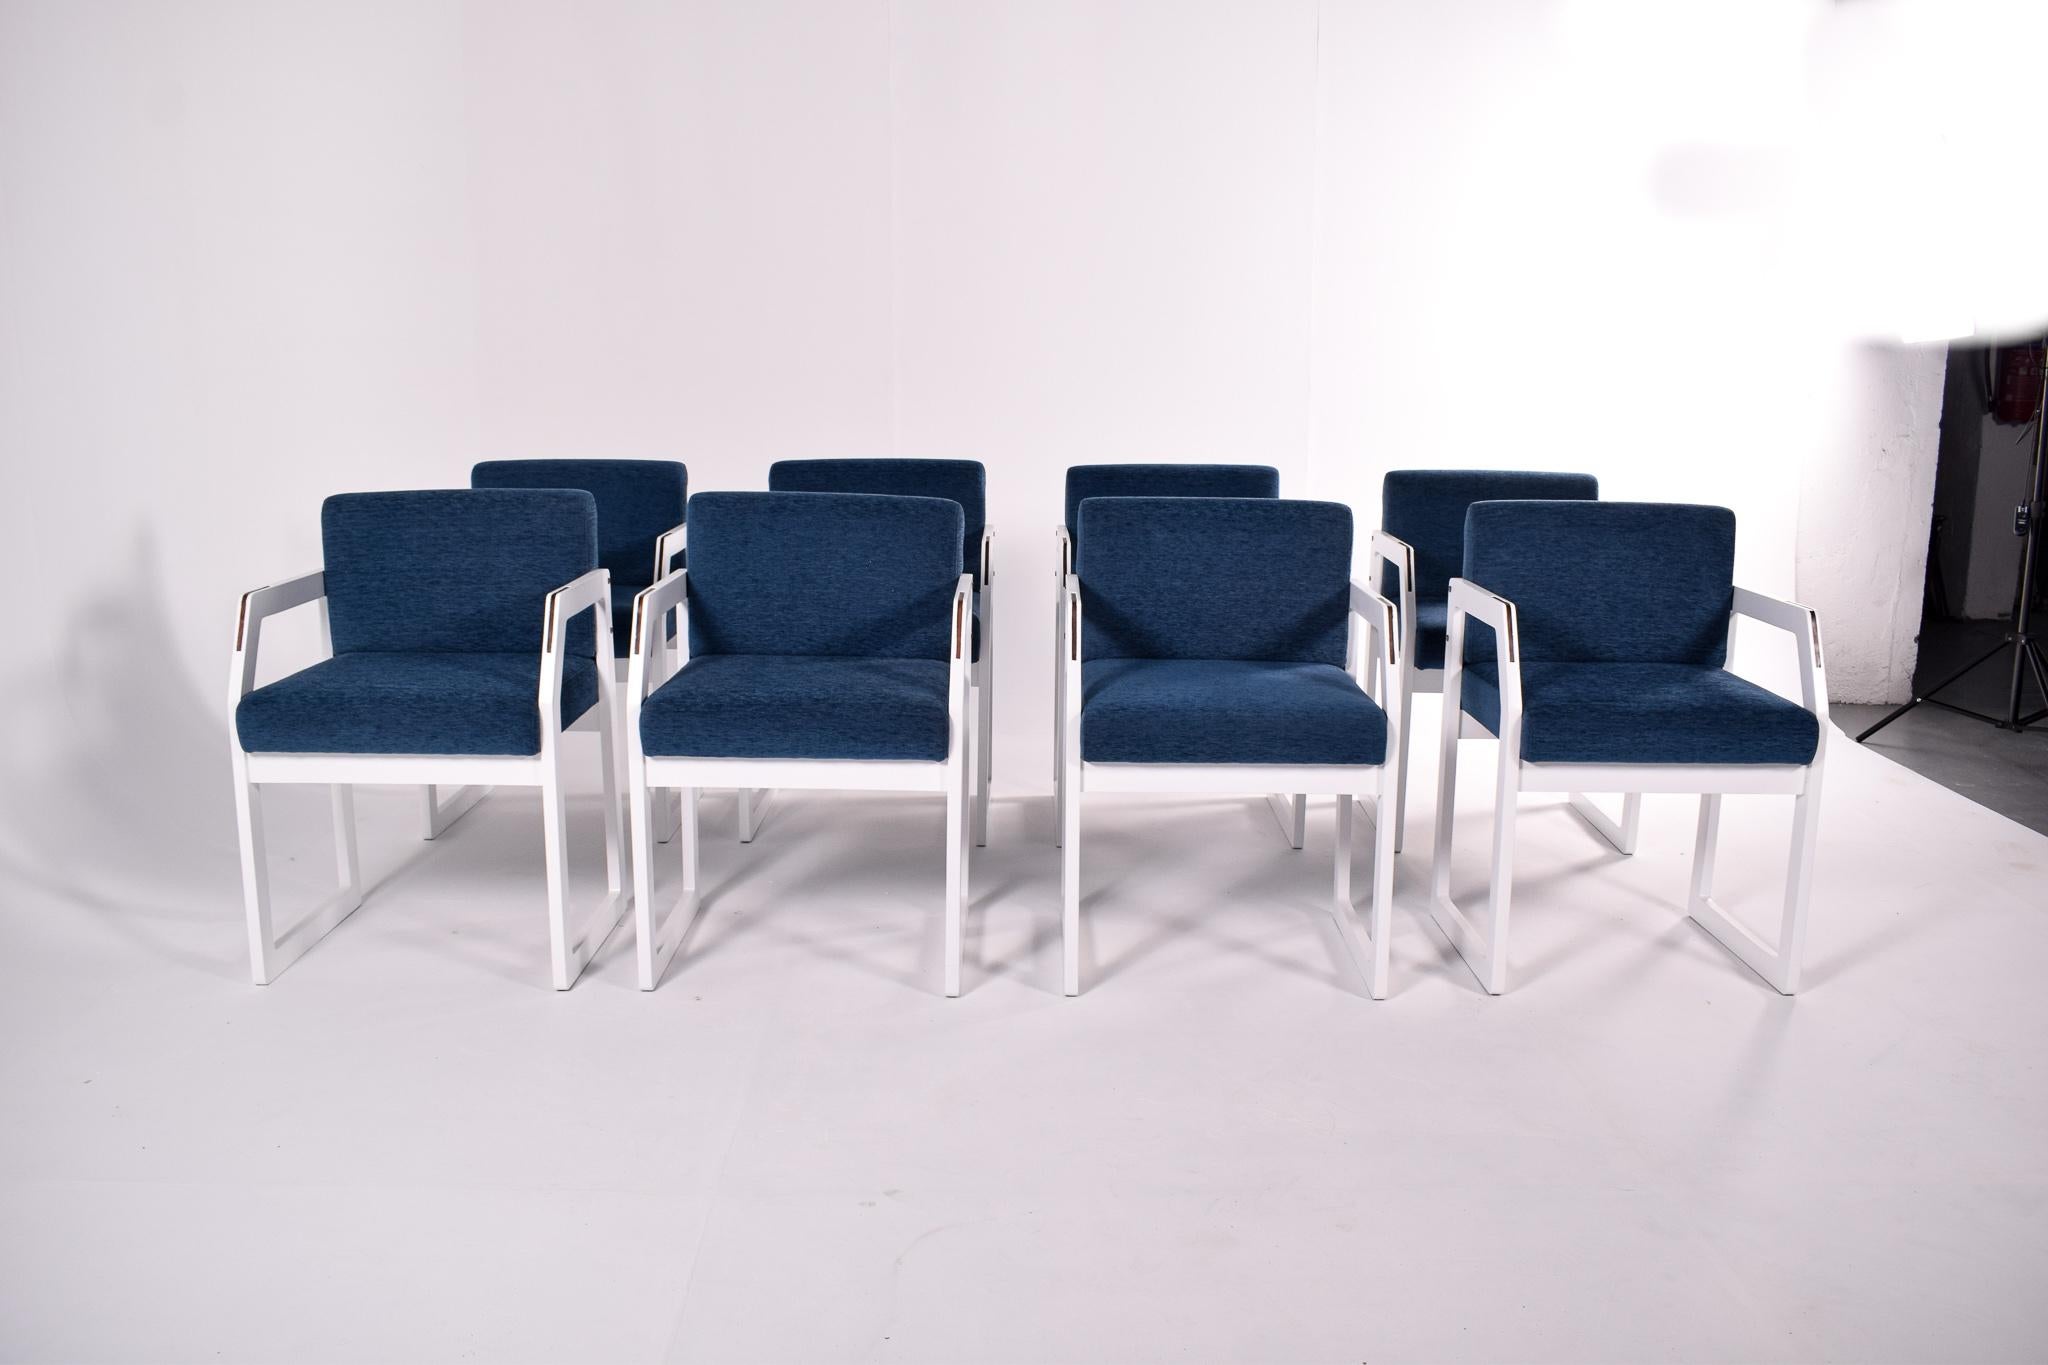 This set of modern-style chairs boasts a design that marries comfort with contemporary elegance. Each chair features a backrest and seat upholstered in a vibrant blue fabric, providing a pop of color as well as a comfortable seating experience. The